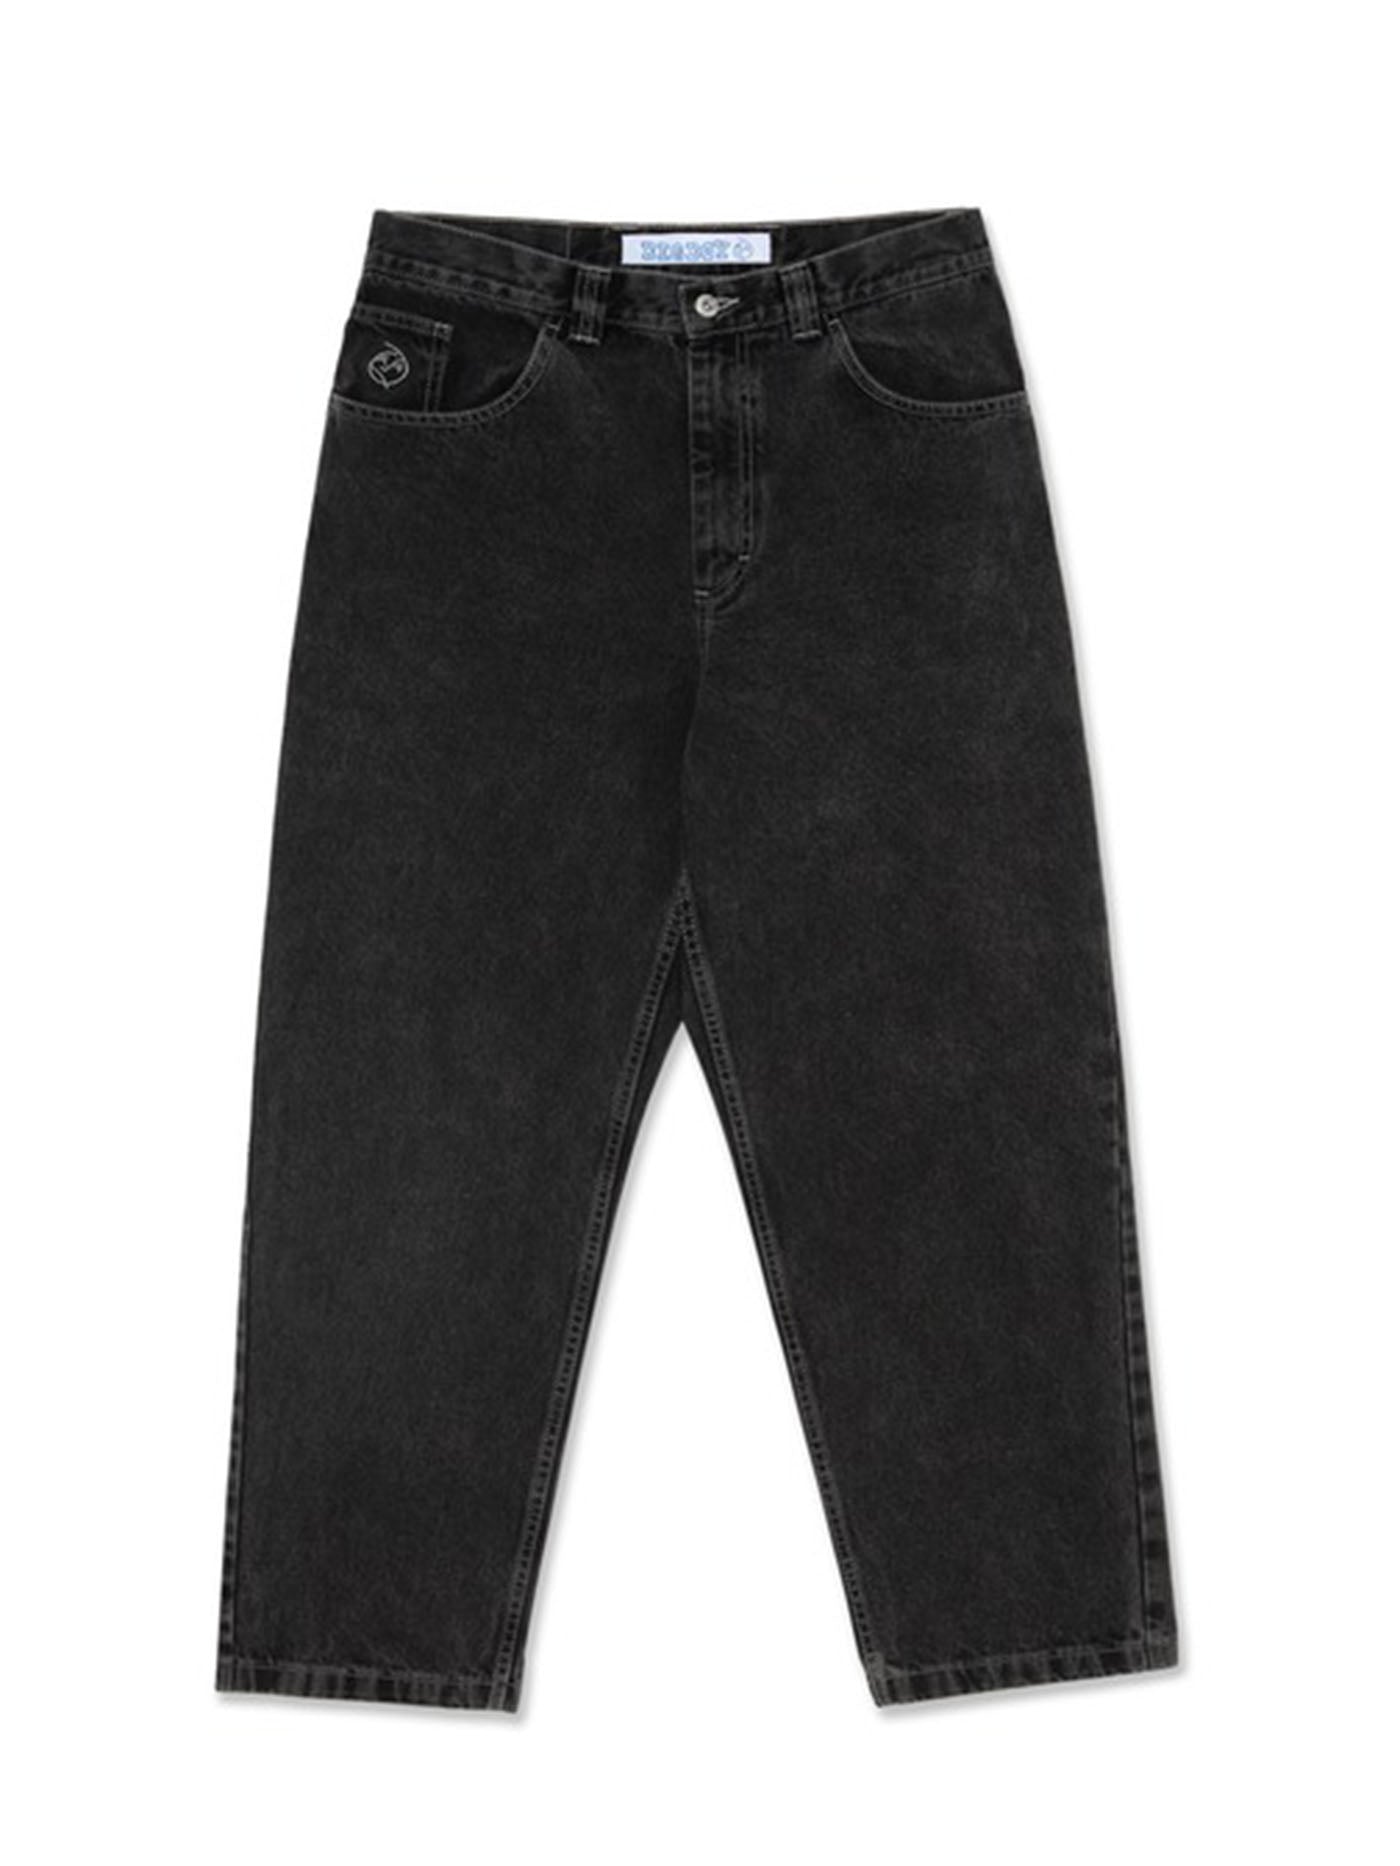 Women's, Men's and Youth Jeans